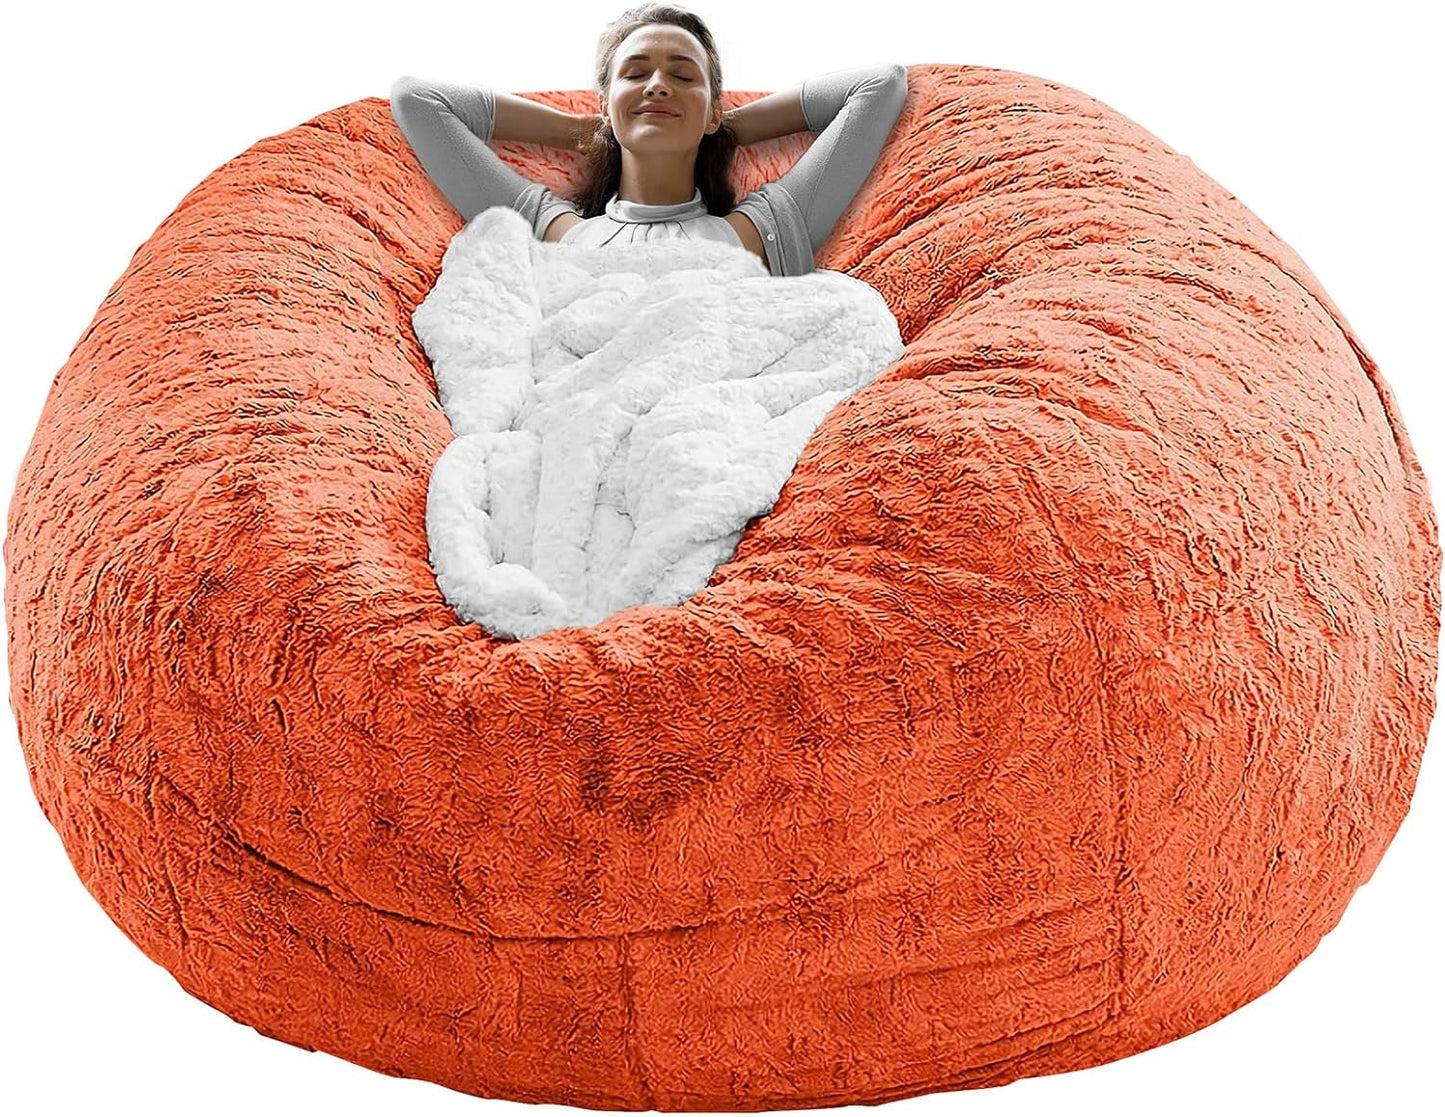 Bean Bag Chair Cover(It Was Only a Cover, Not a Full Bean Bag) Chair Cushion, Big round Soft Fluffy PV Velvet Sofa Bed Cover, Living Room Furniture, Lazy Sofa Bed Cover,5Ft Orange